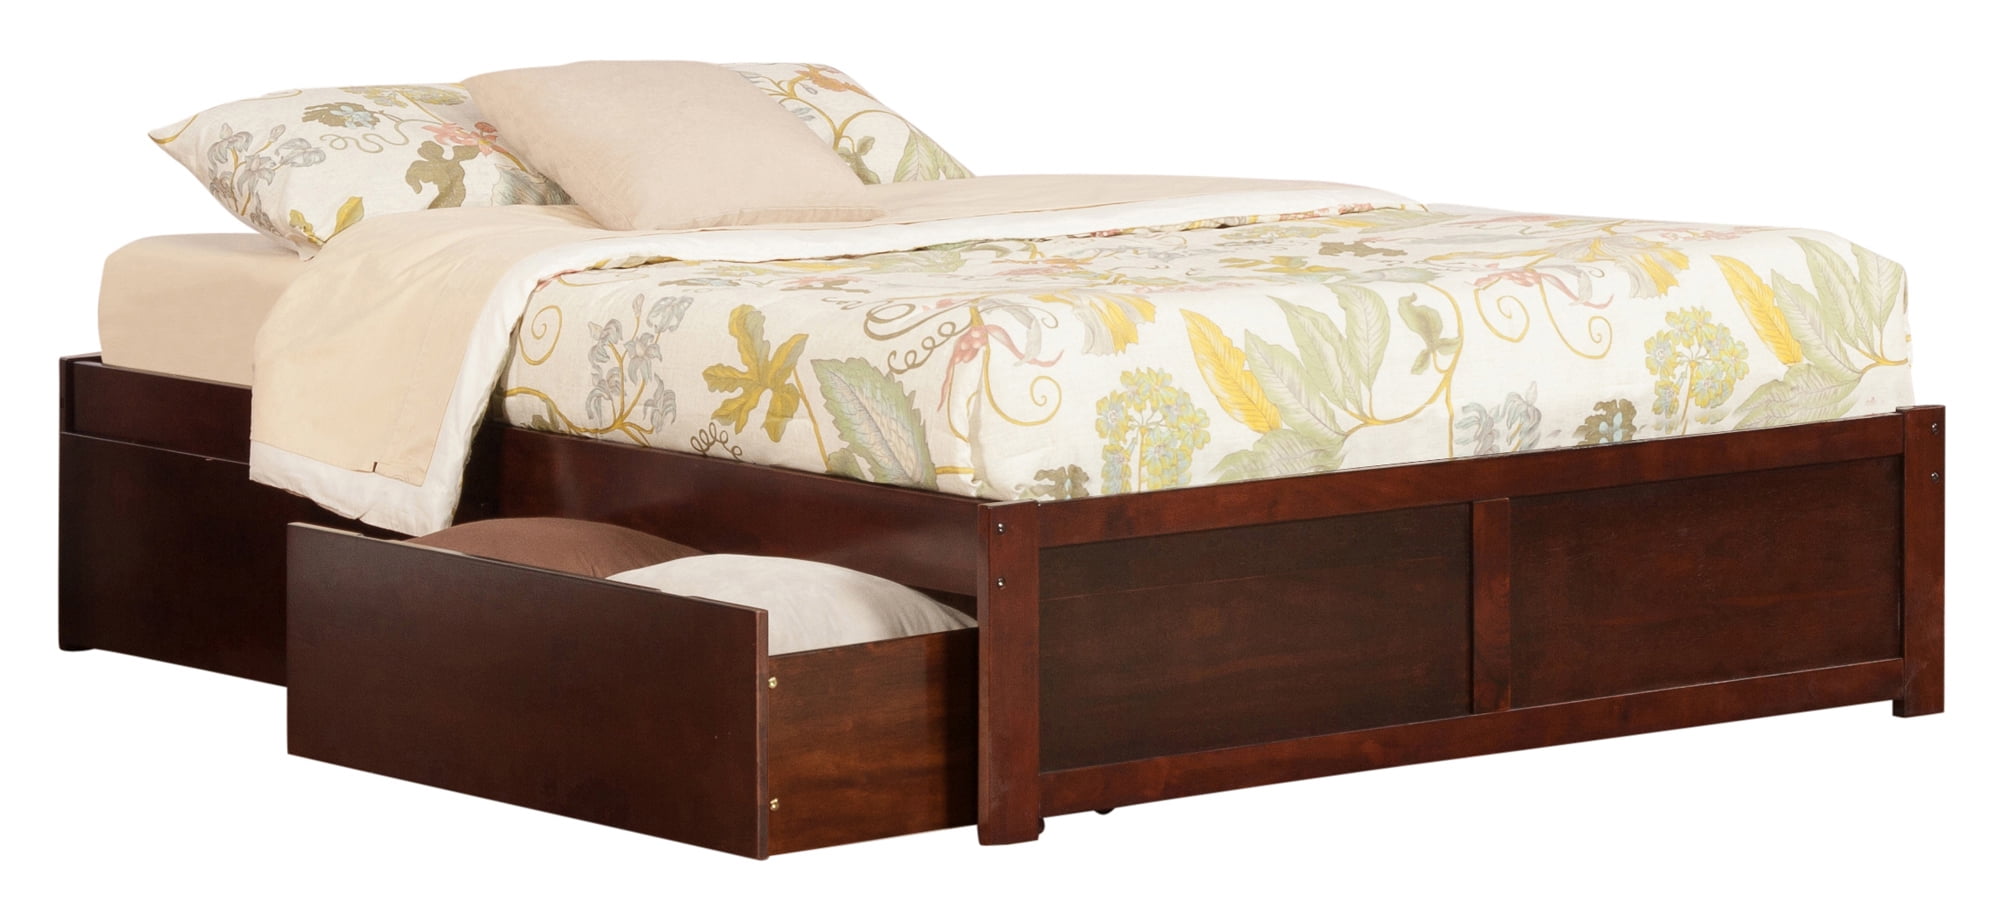 Ar8052114 Concord Flat Panel Foot Board With Urban Bed Drawers, Antique Walnut - King